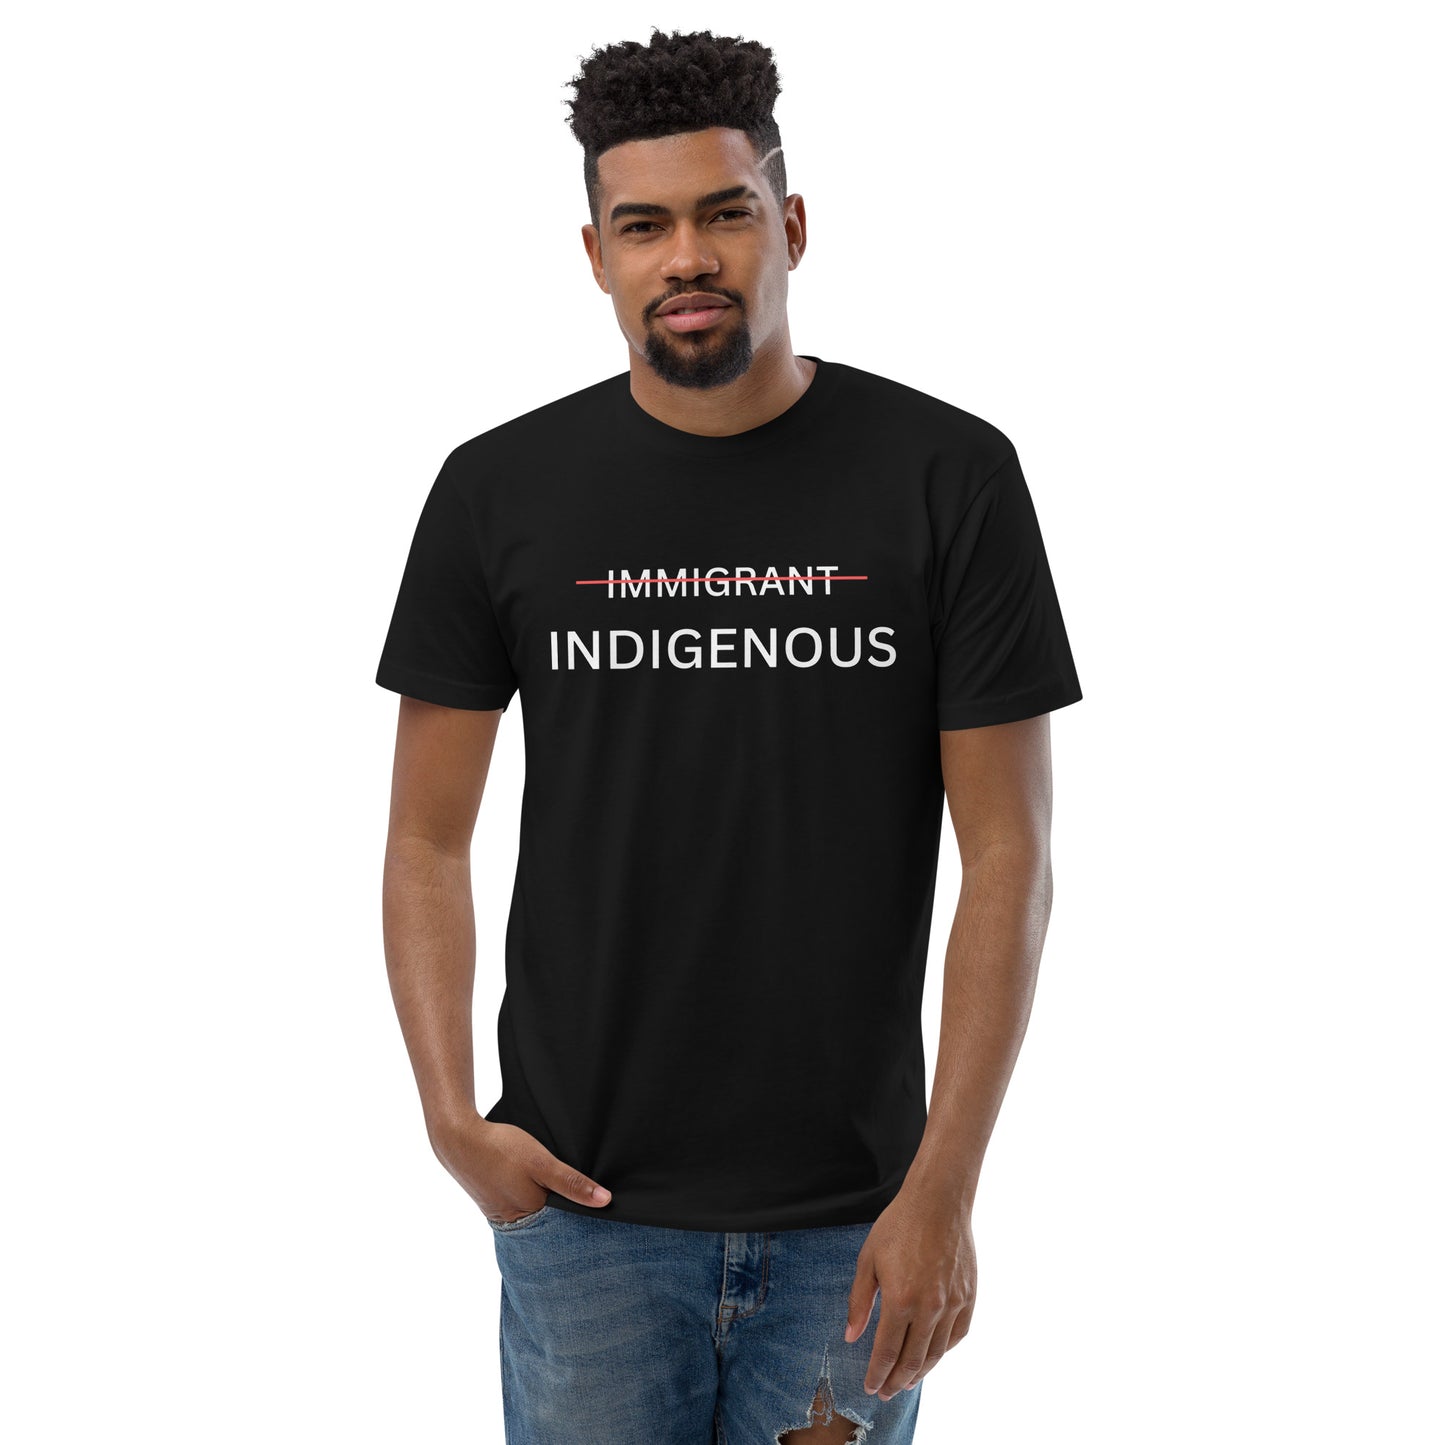 Fitted Men's Indigenous peoples